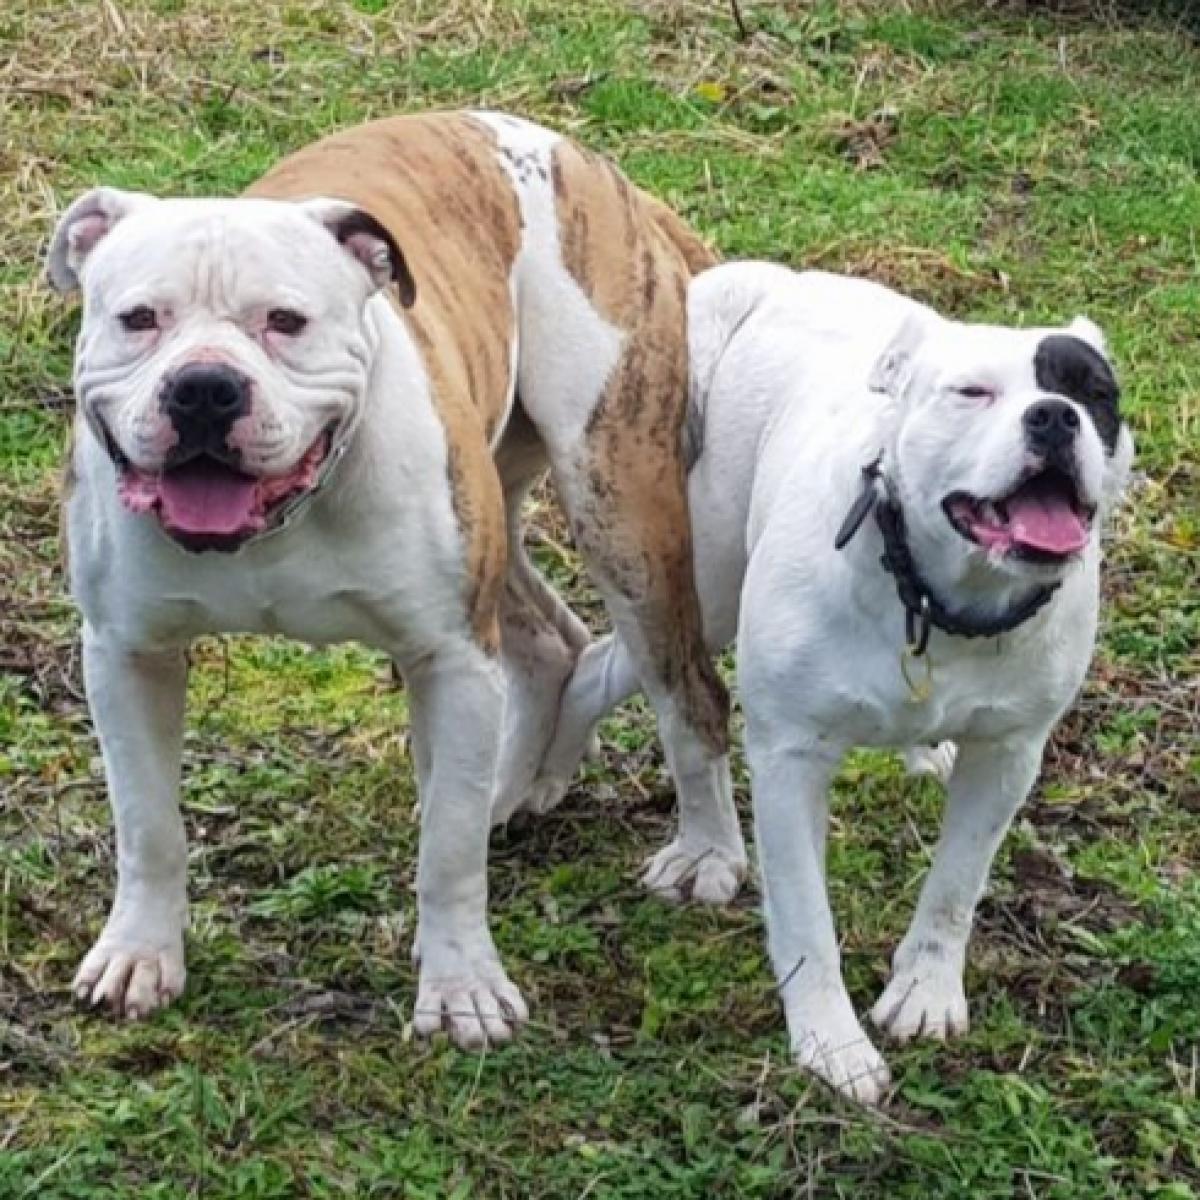 American Bulldog Pups Snub Nosed K9's Dogs for Sale NZ